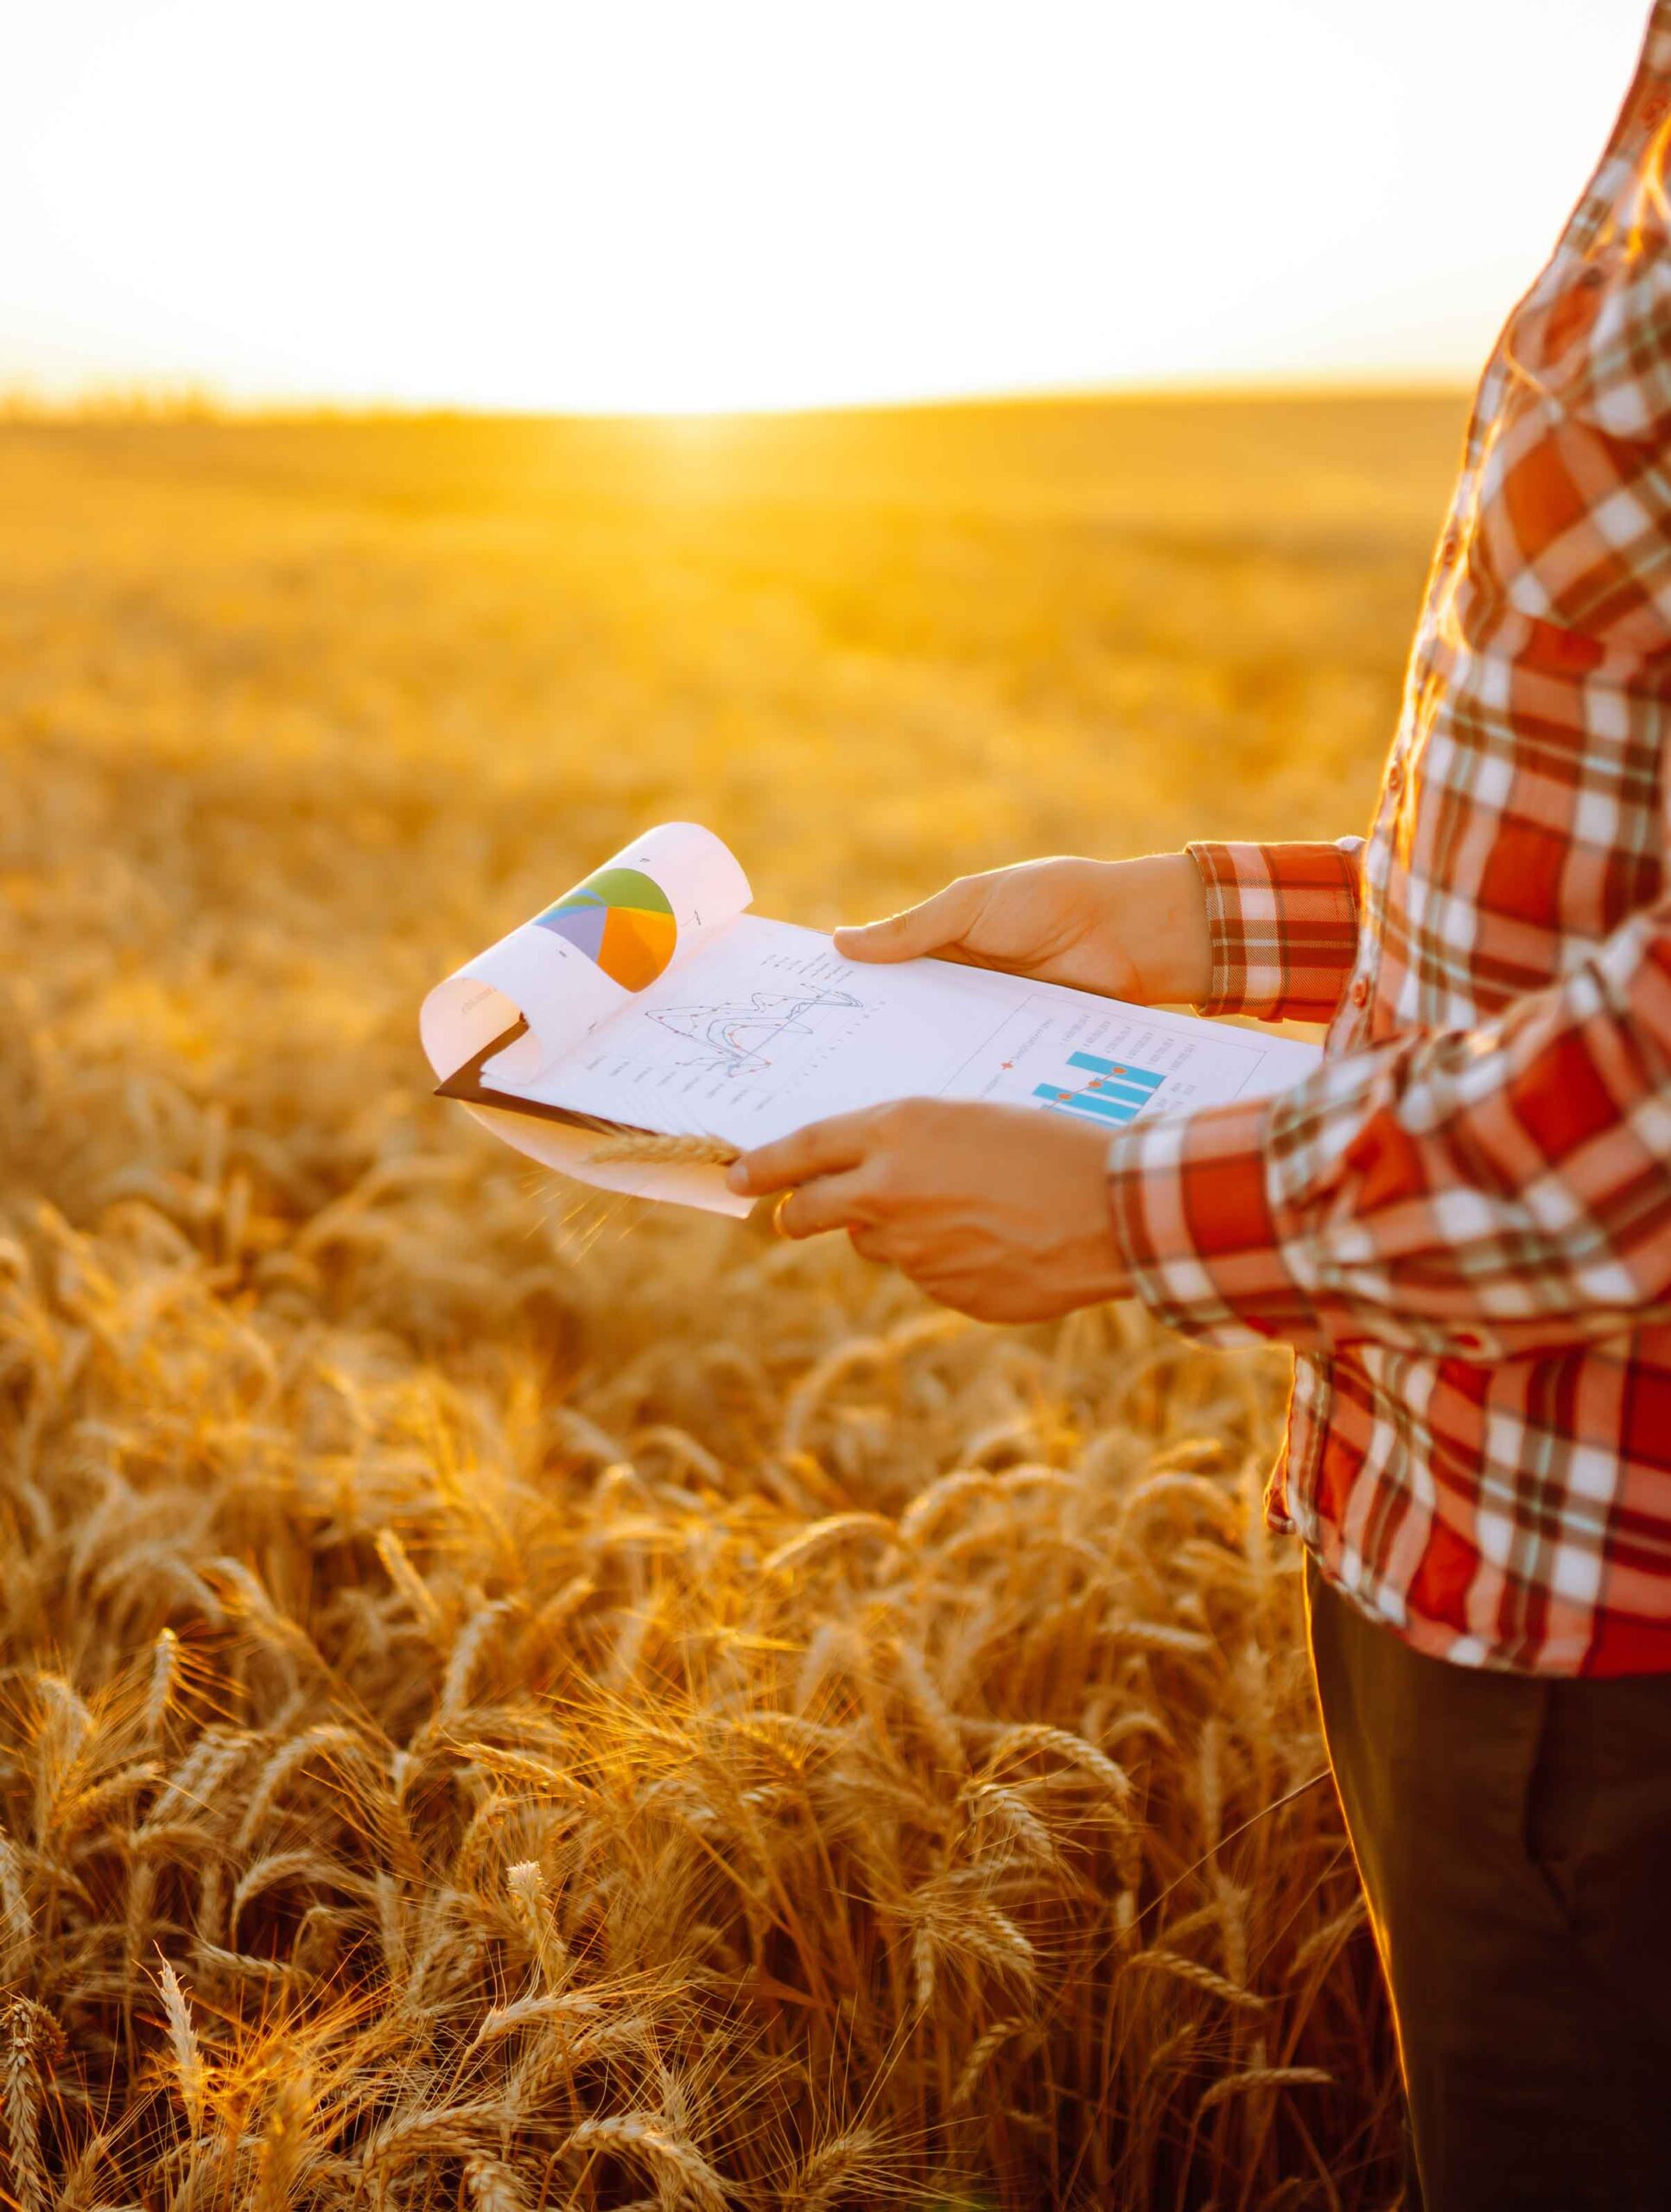 Torso of a man in a red plaid shirt holding a clipboard in a wheat field at sunrise.